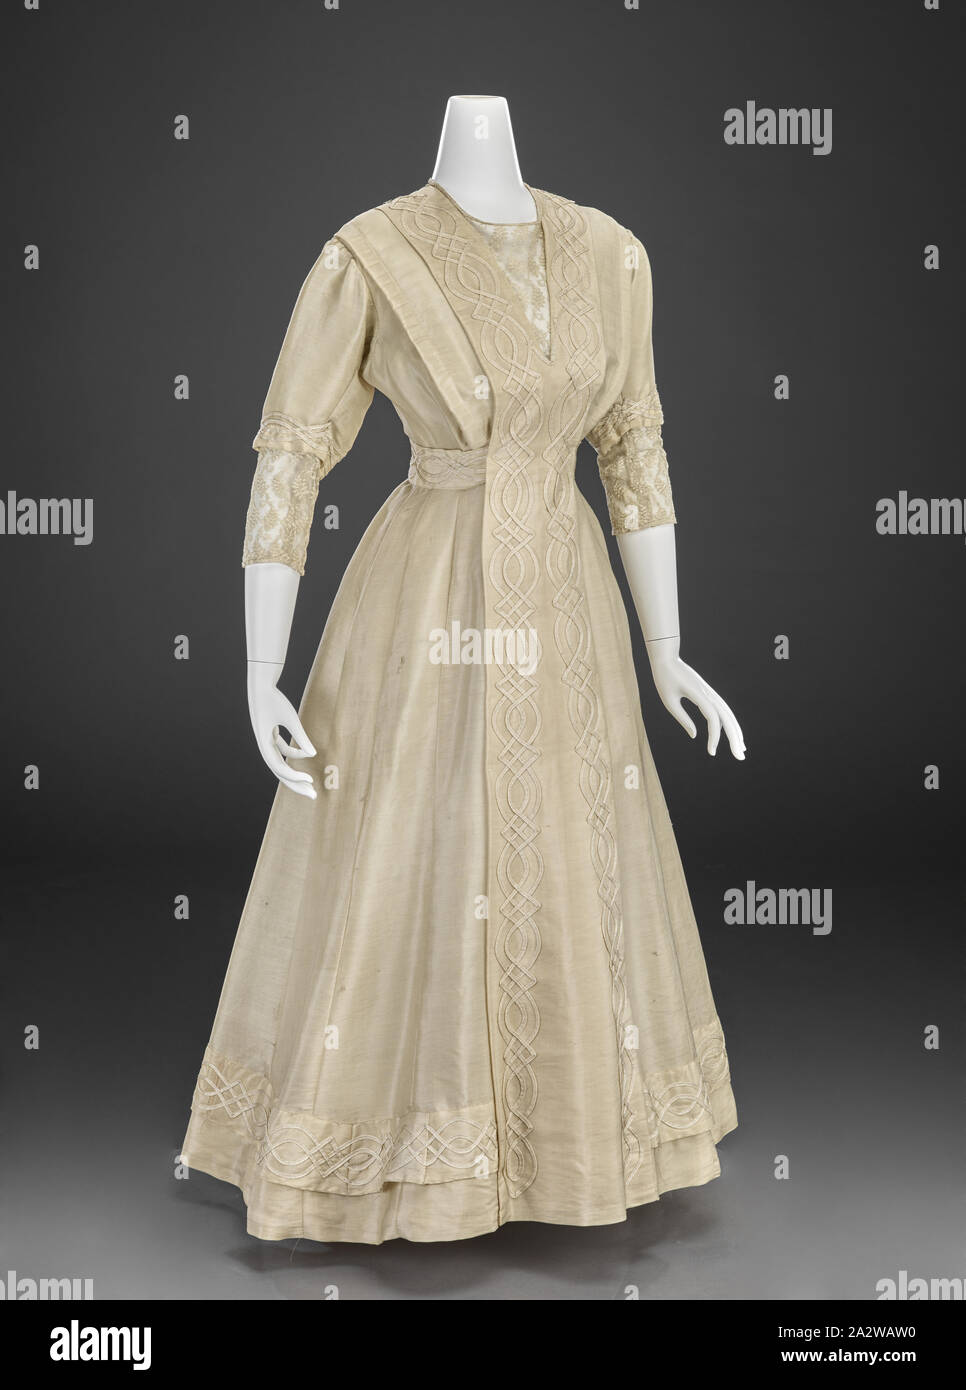 dress, Unknown, 1910-1915, silk, mohair, braid, lace, center back 48 in., center front 46-1/2 in., bust 32 in., waist 27 in., hips 32 in., sleeve length 16 in., shoulders 16 in., American, Textile and Fashion Arts Stock Photo